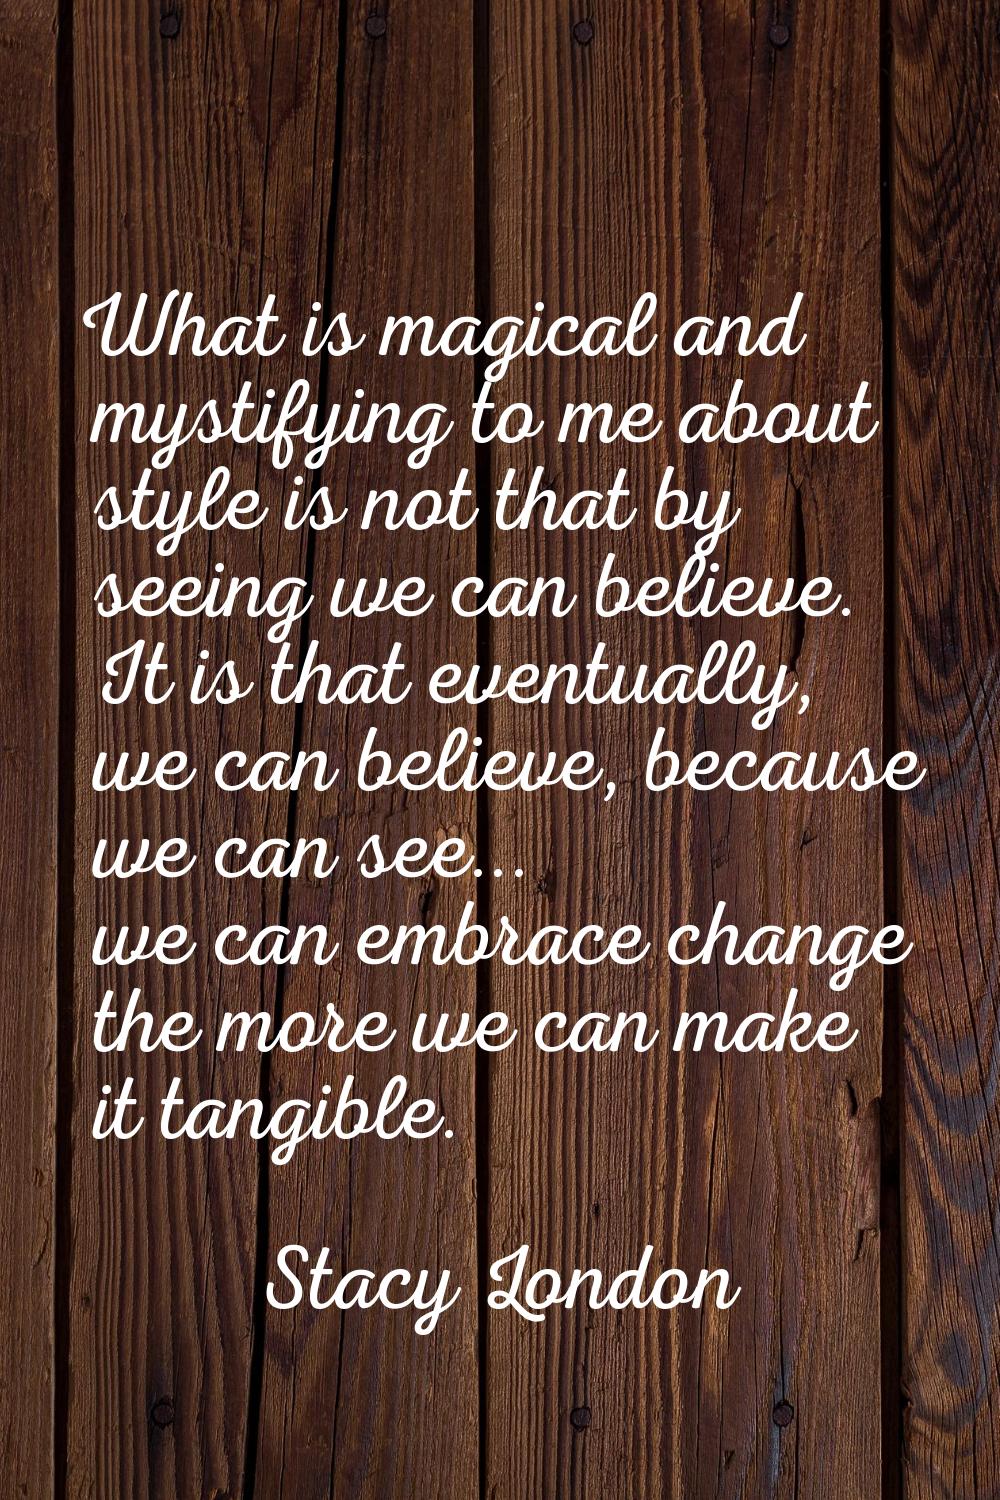 What is magical and mystifying to me about style is not that by seeing we can believe. It is that e